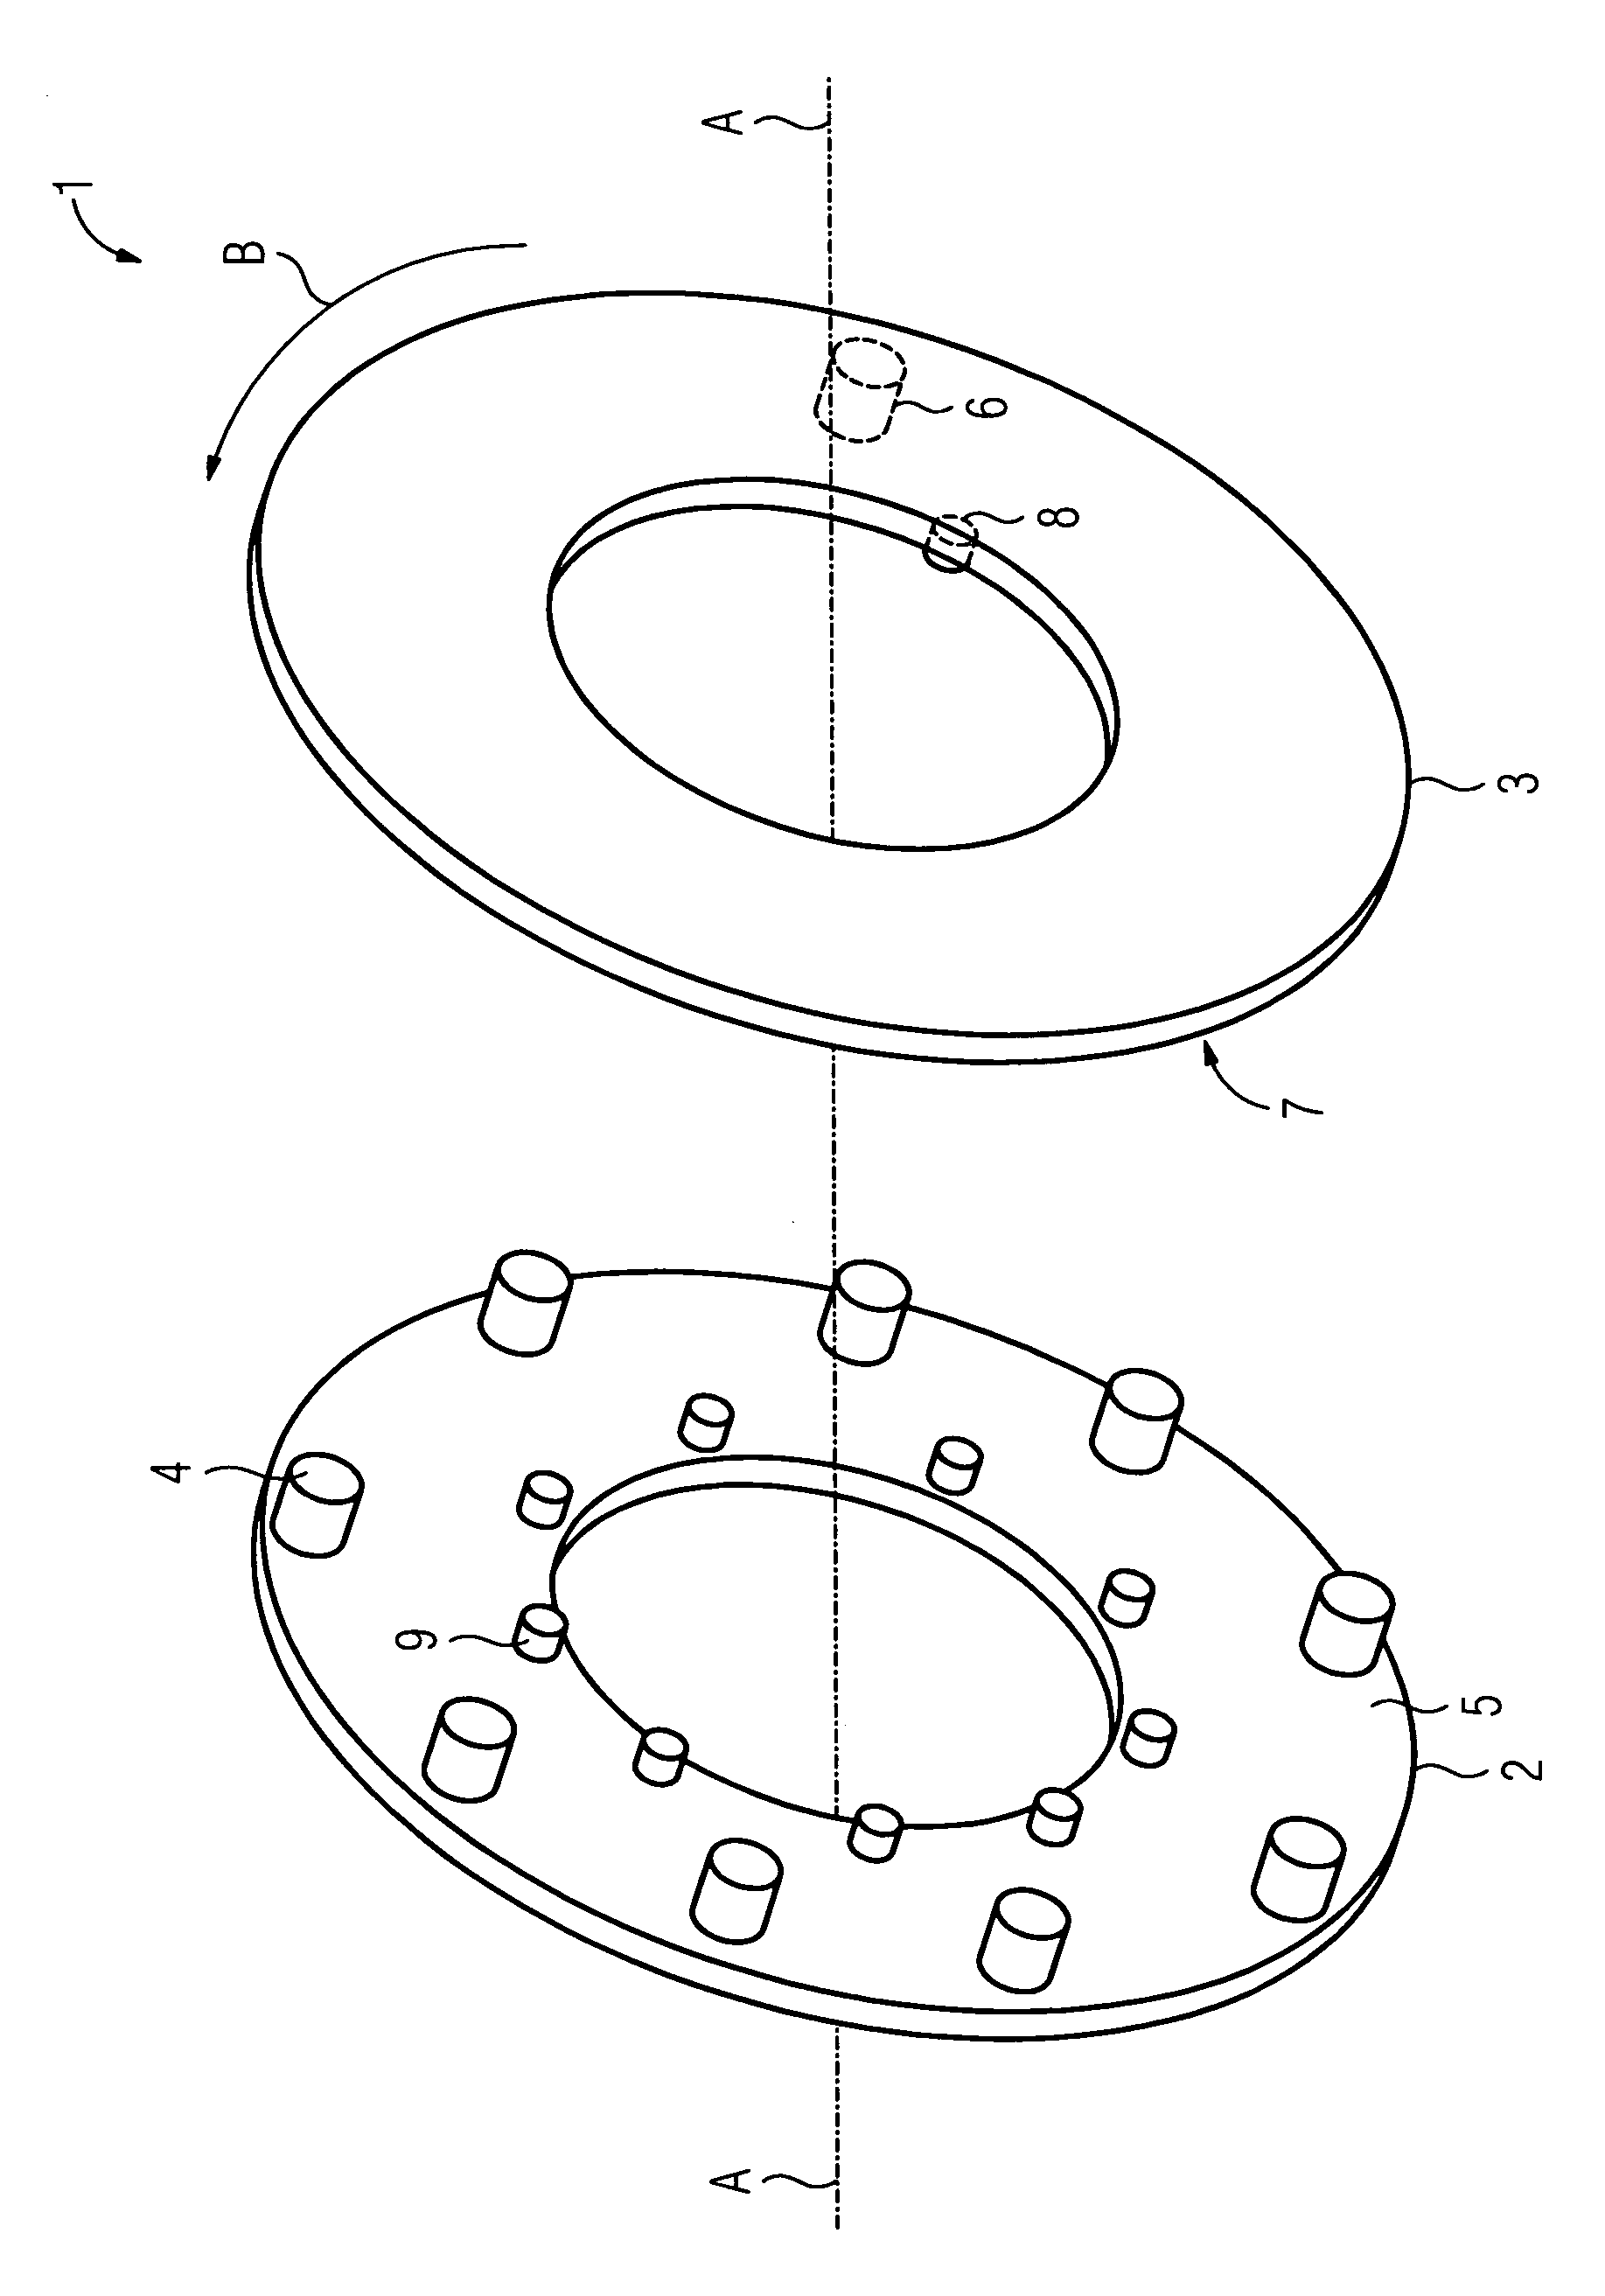 Device for transferring light signals between two elements relatively movable to one another